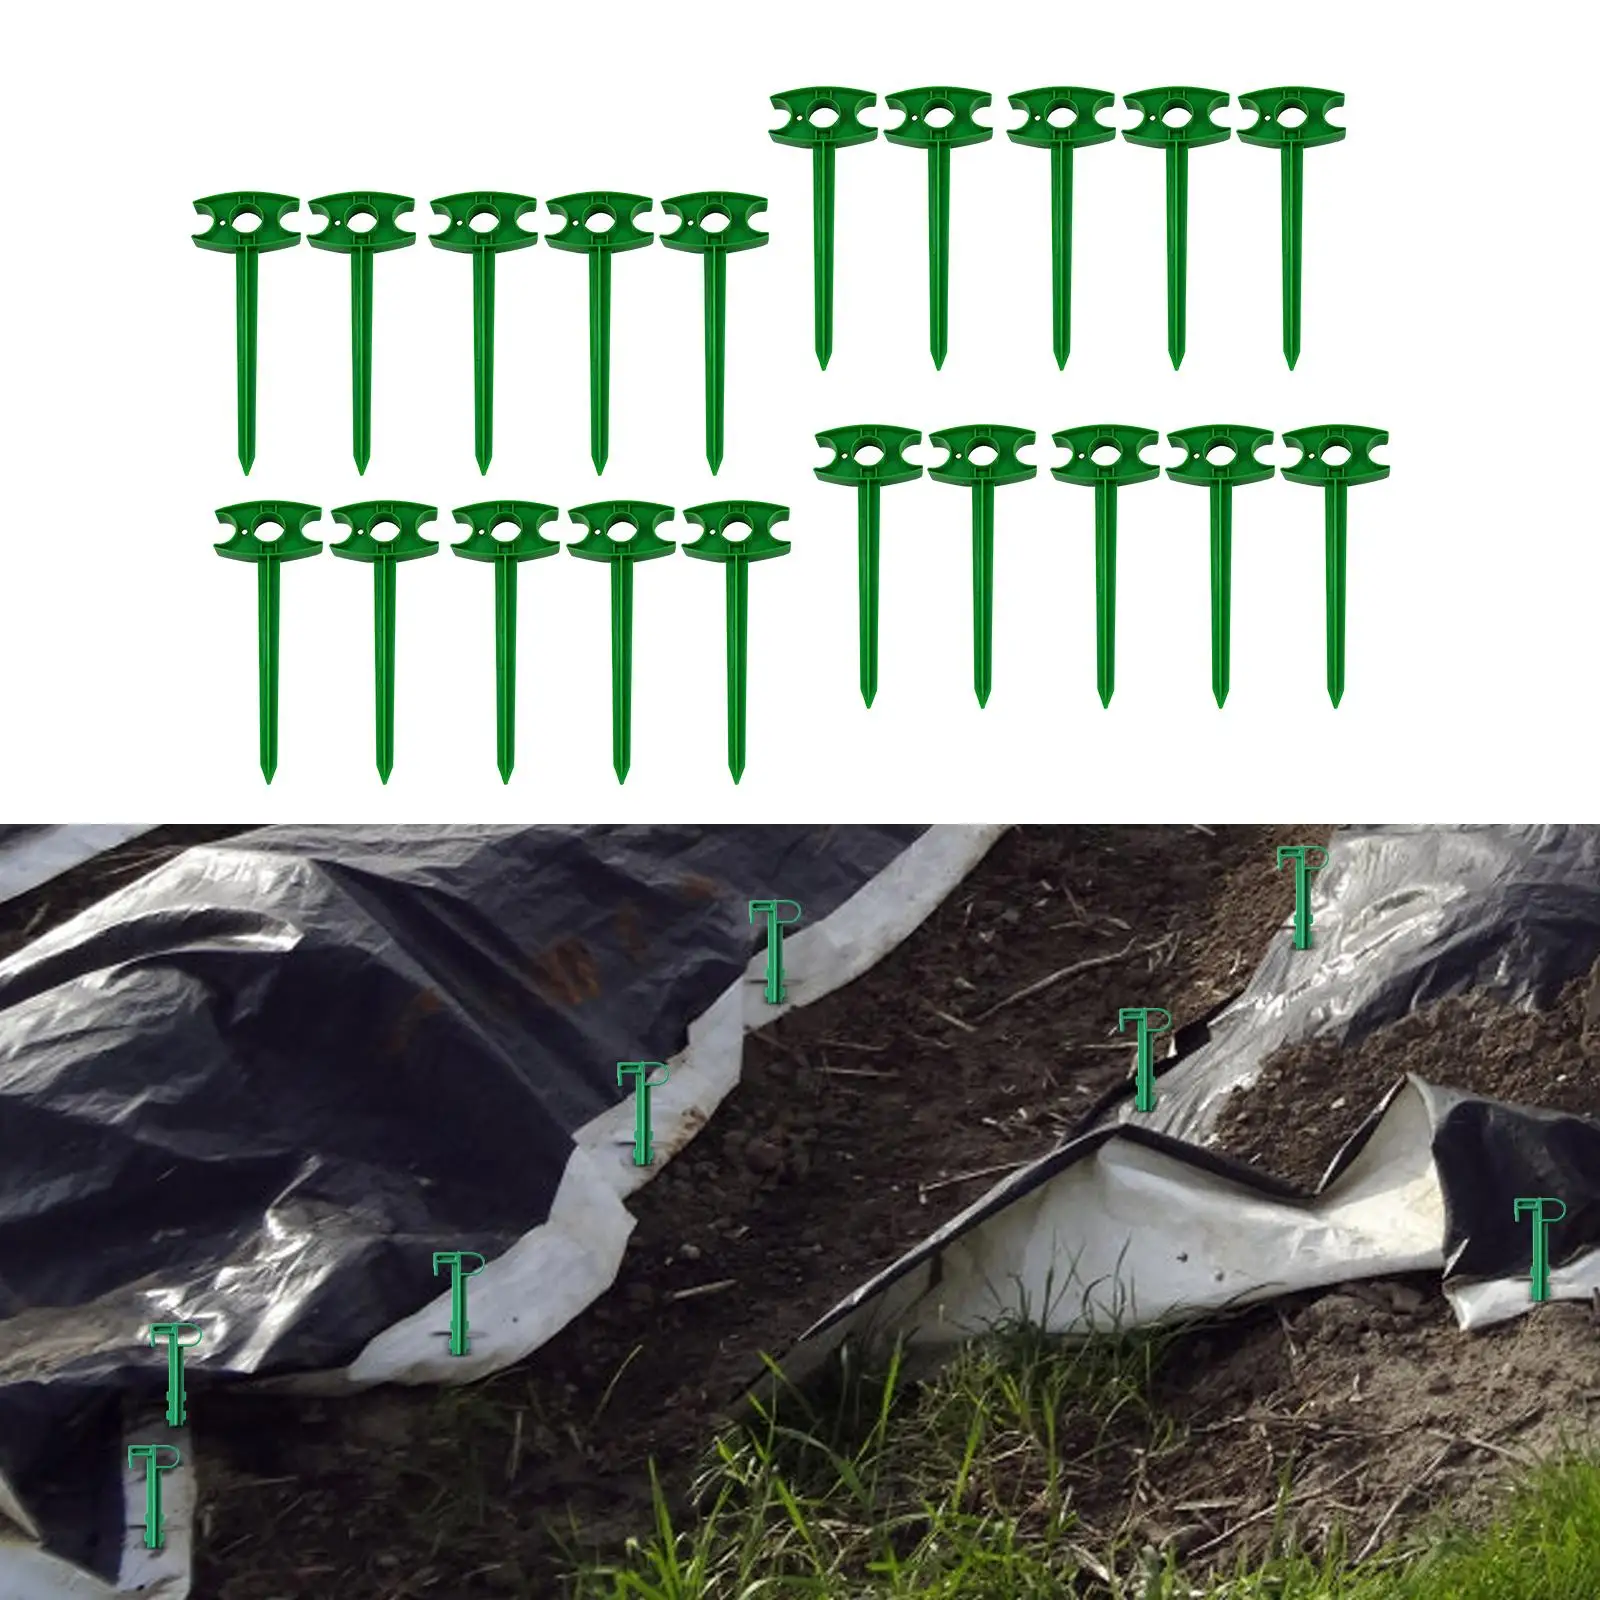 20Pcs Landscape Stakes Length 25cm Tarp Stakes Yard Garden Stakes for Greenhouse Fabric Lawn Edging Keeping Garden Netting Down